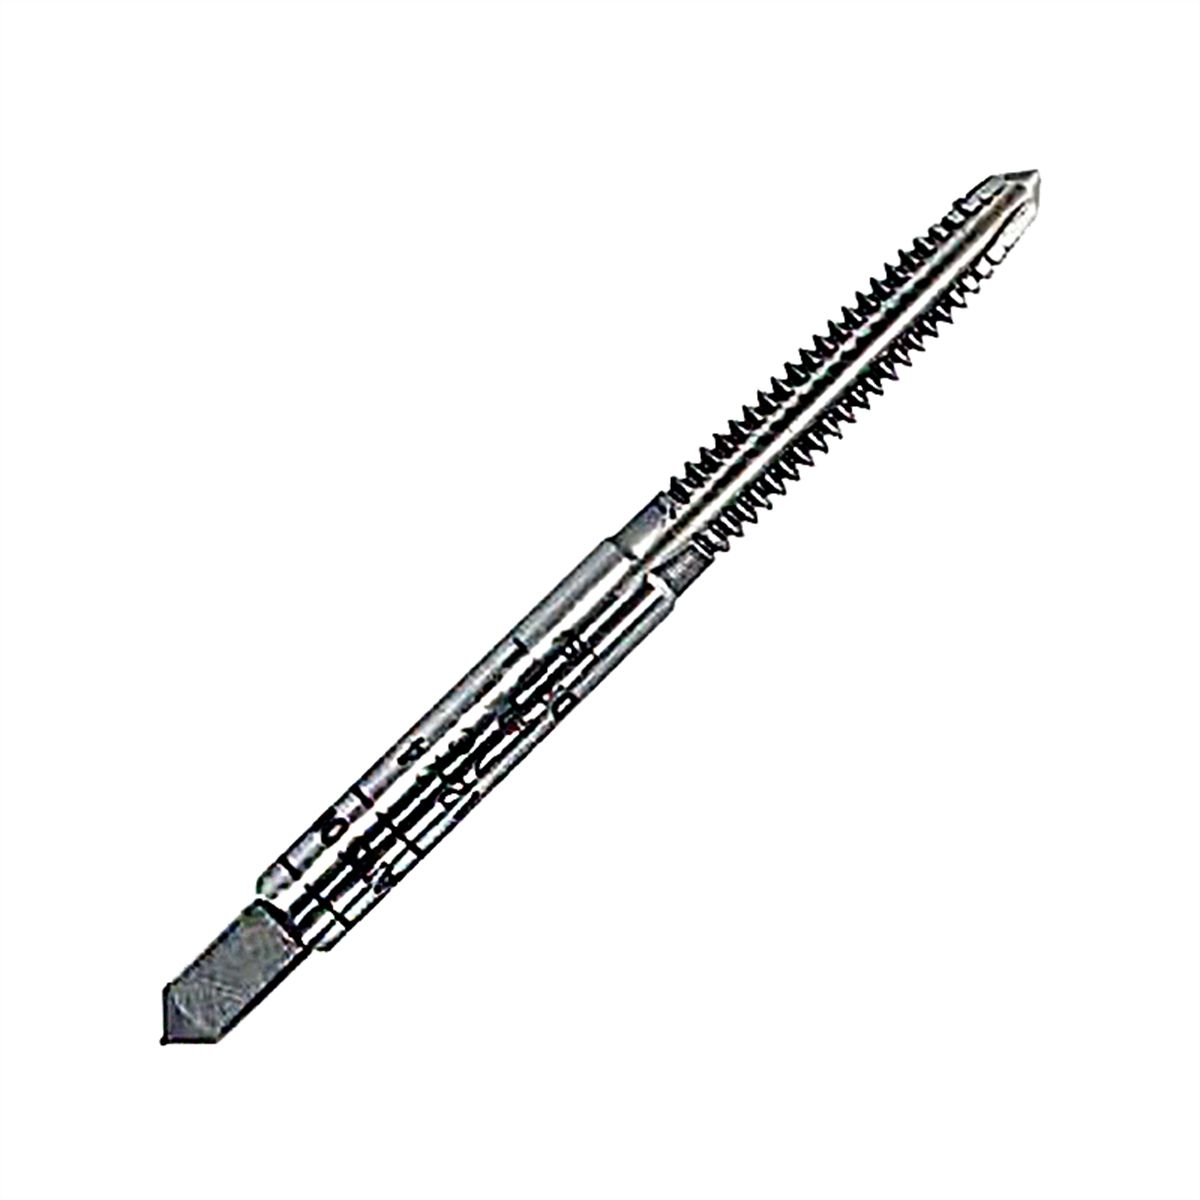 Cut Thread Fractional Plug Tap - 5/8In 11NC Carded